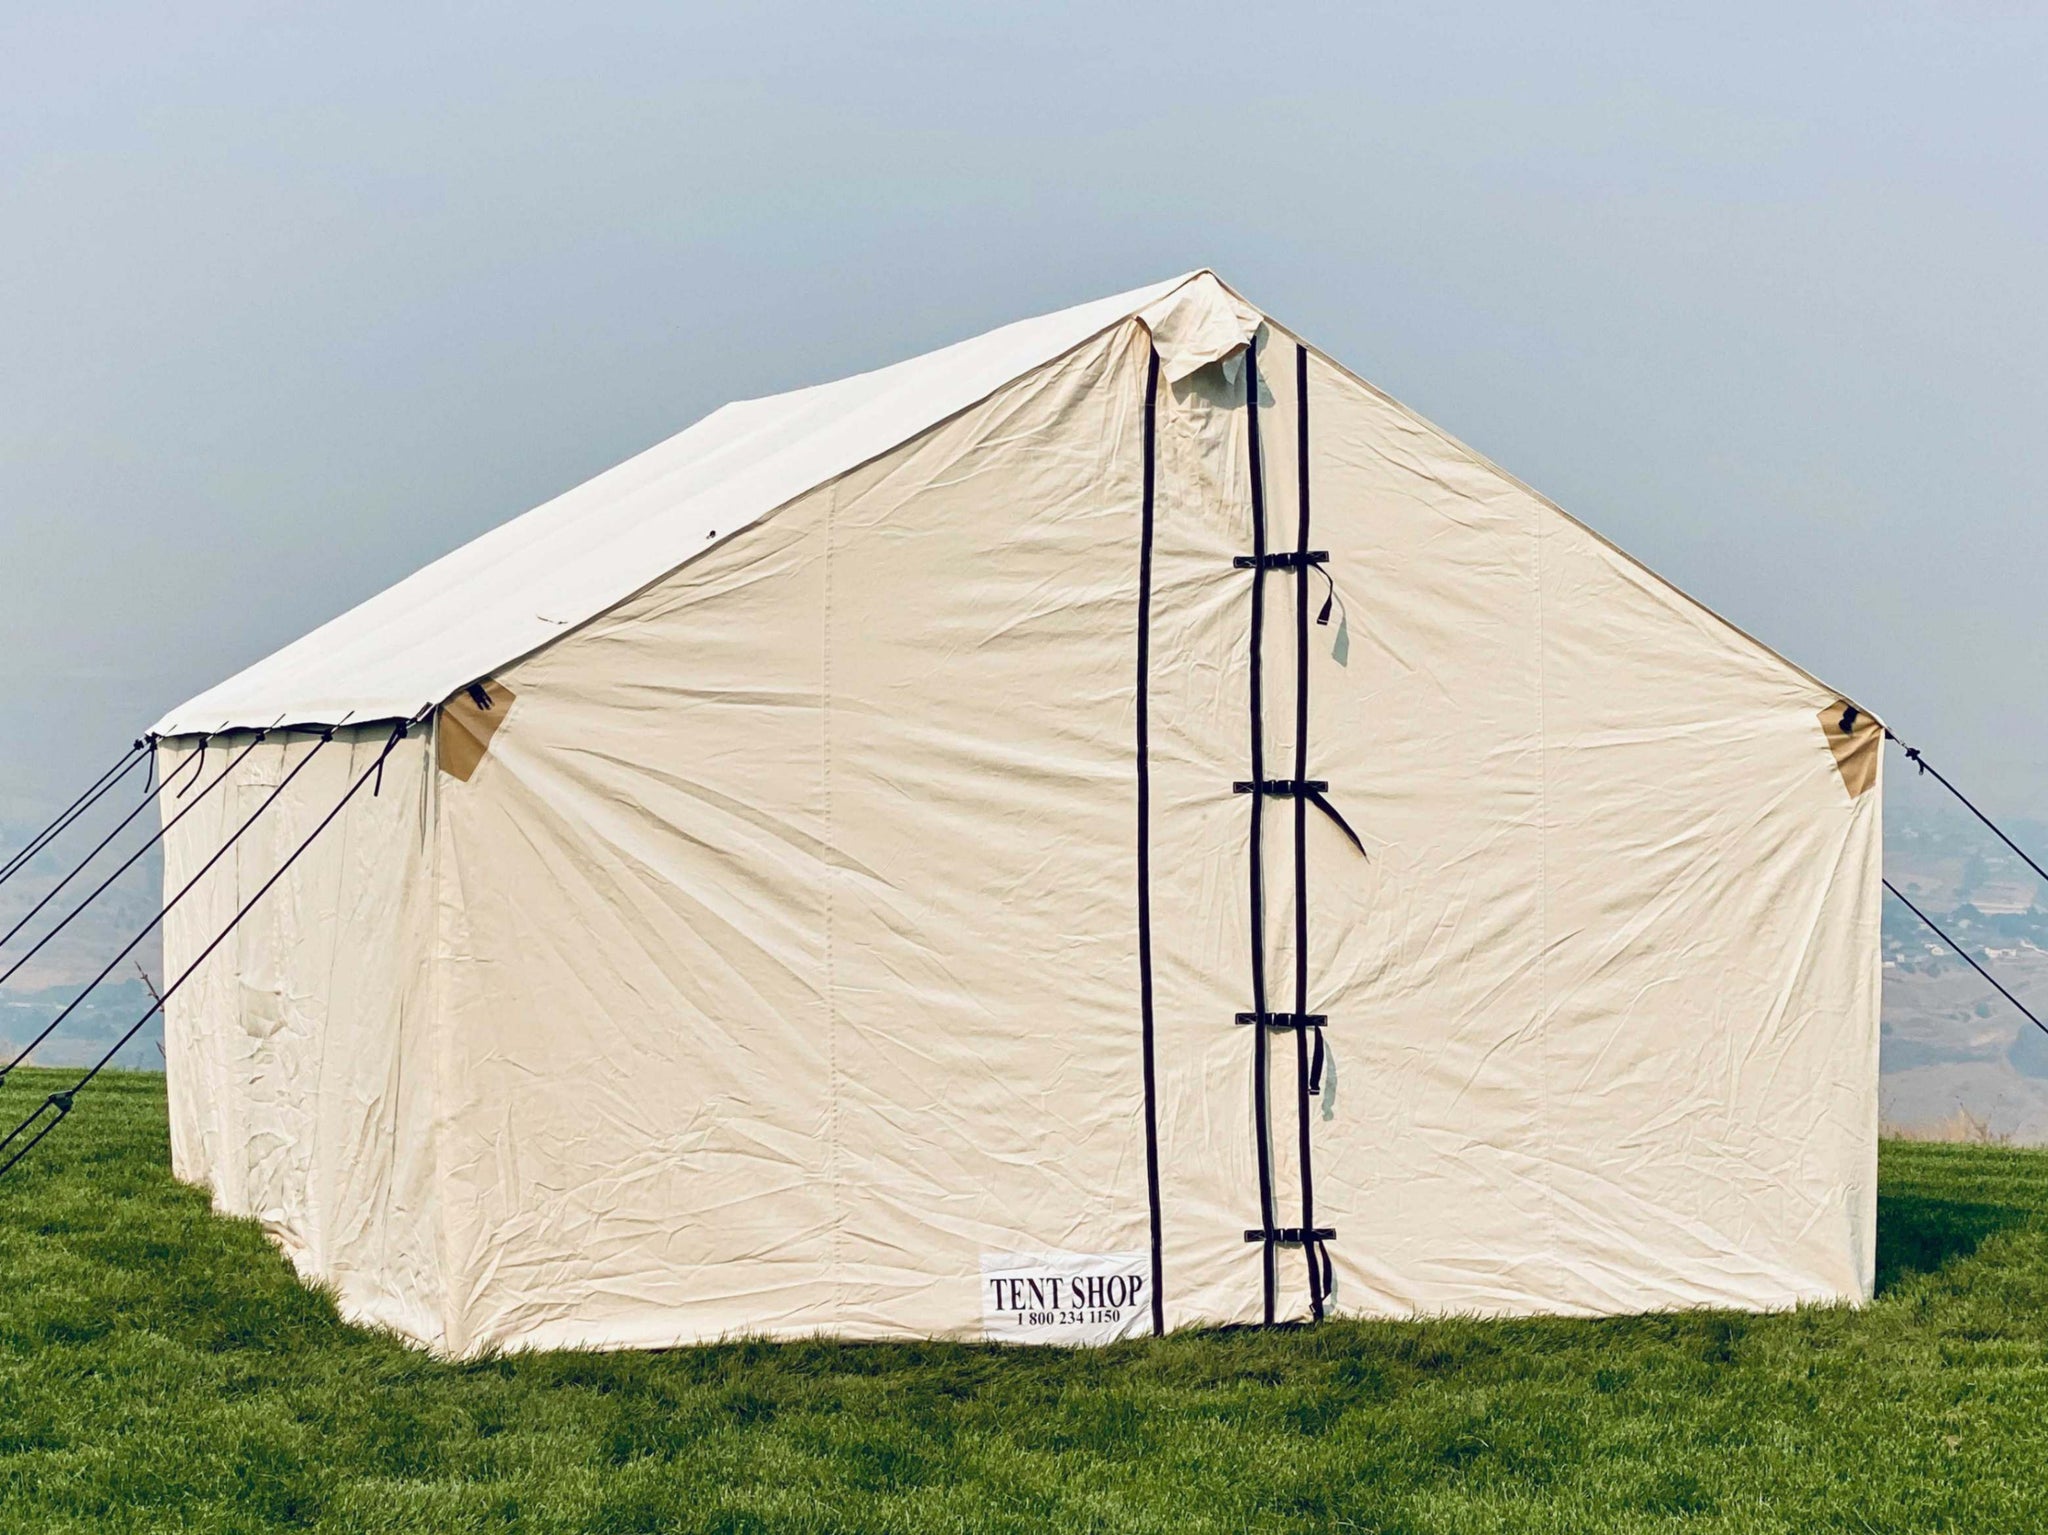 Canvas Wall Tents Pros and Cons - Which is Best for You? - Life inTents